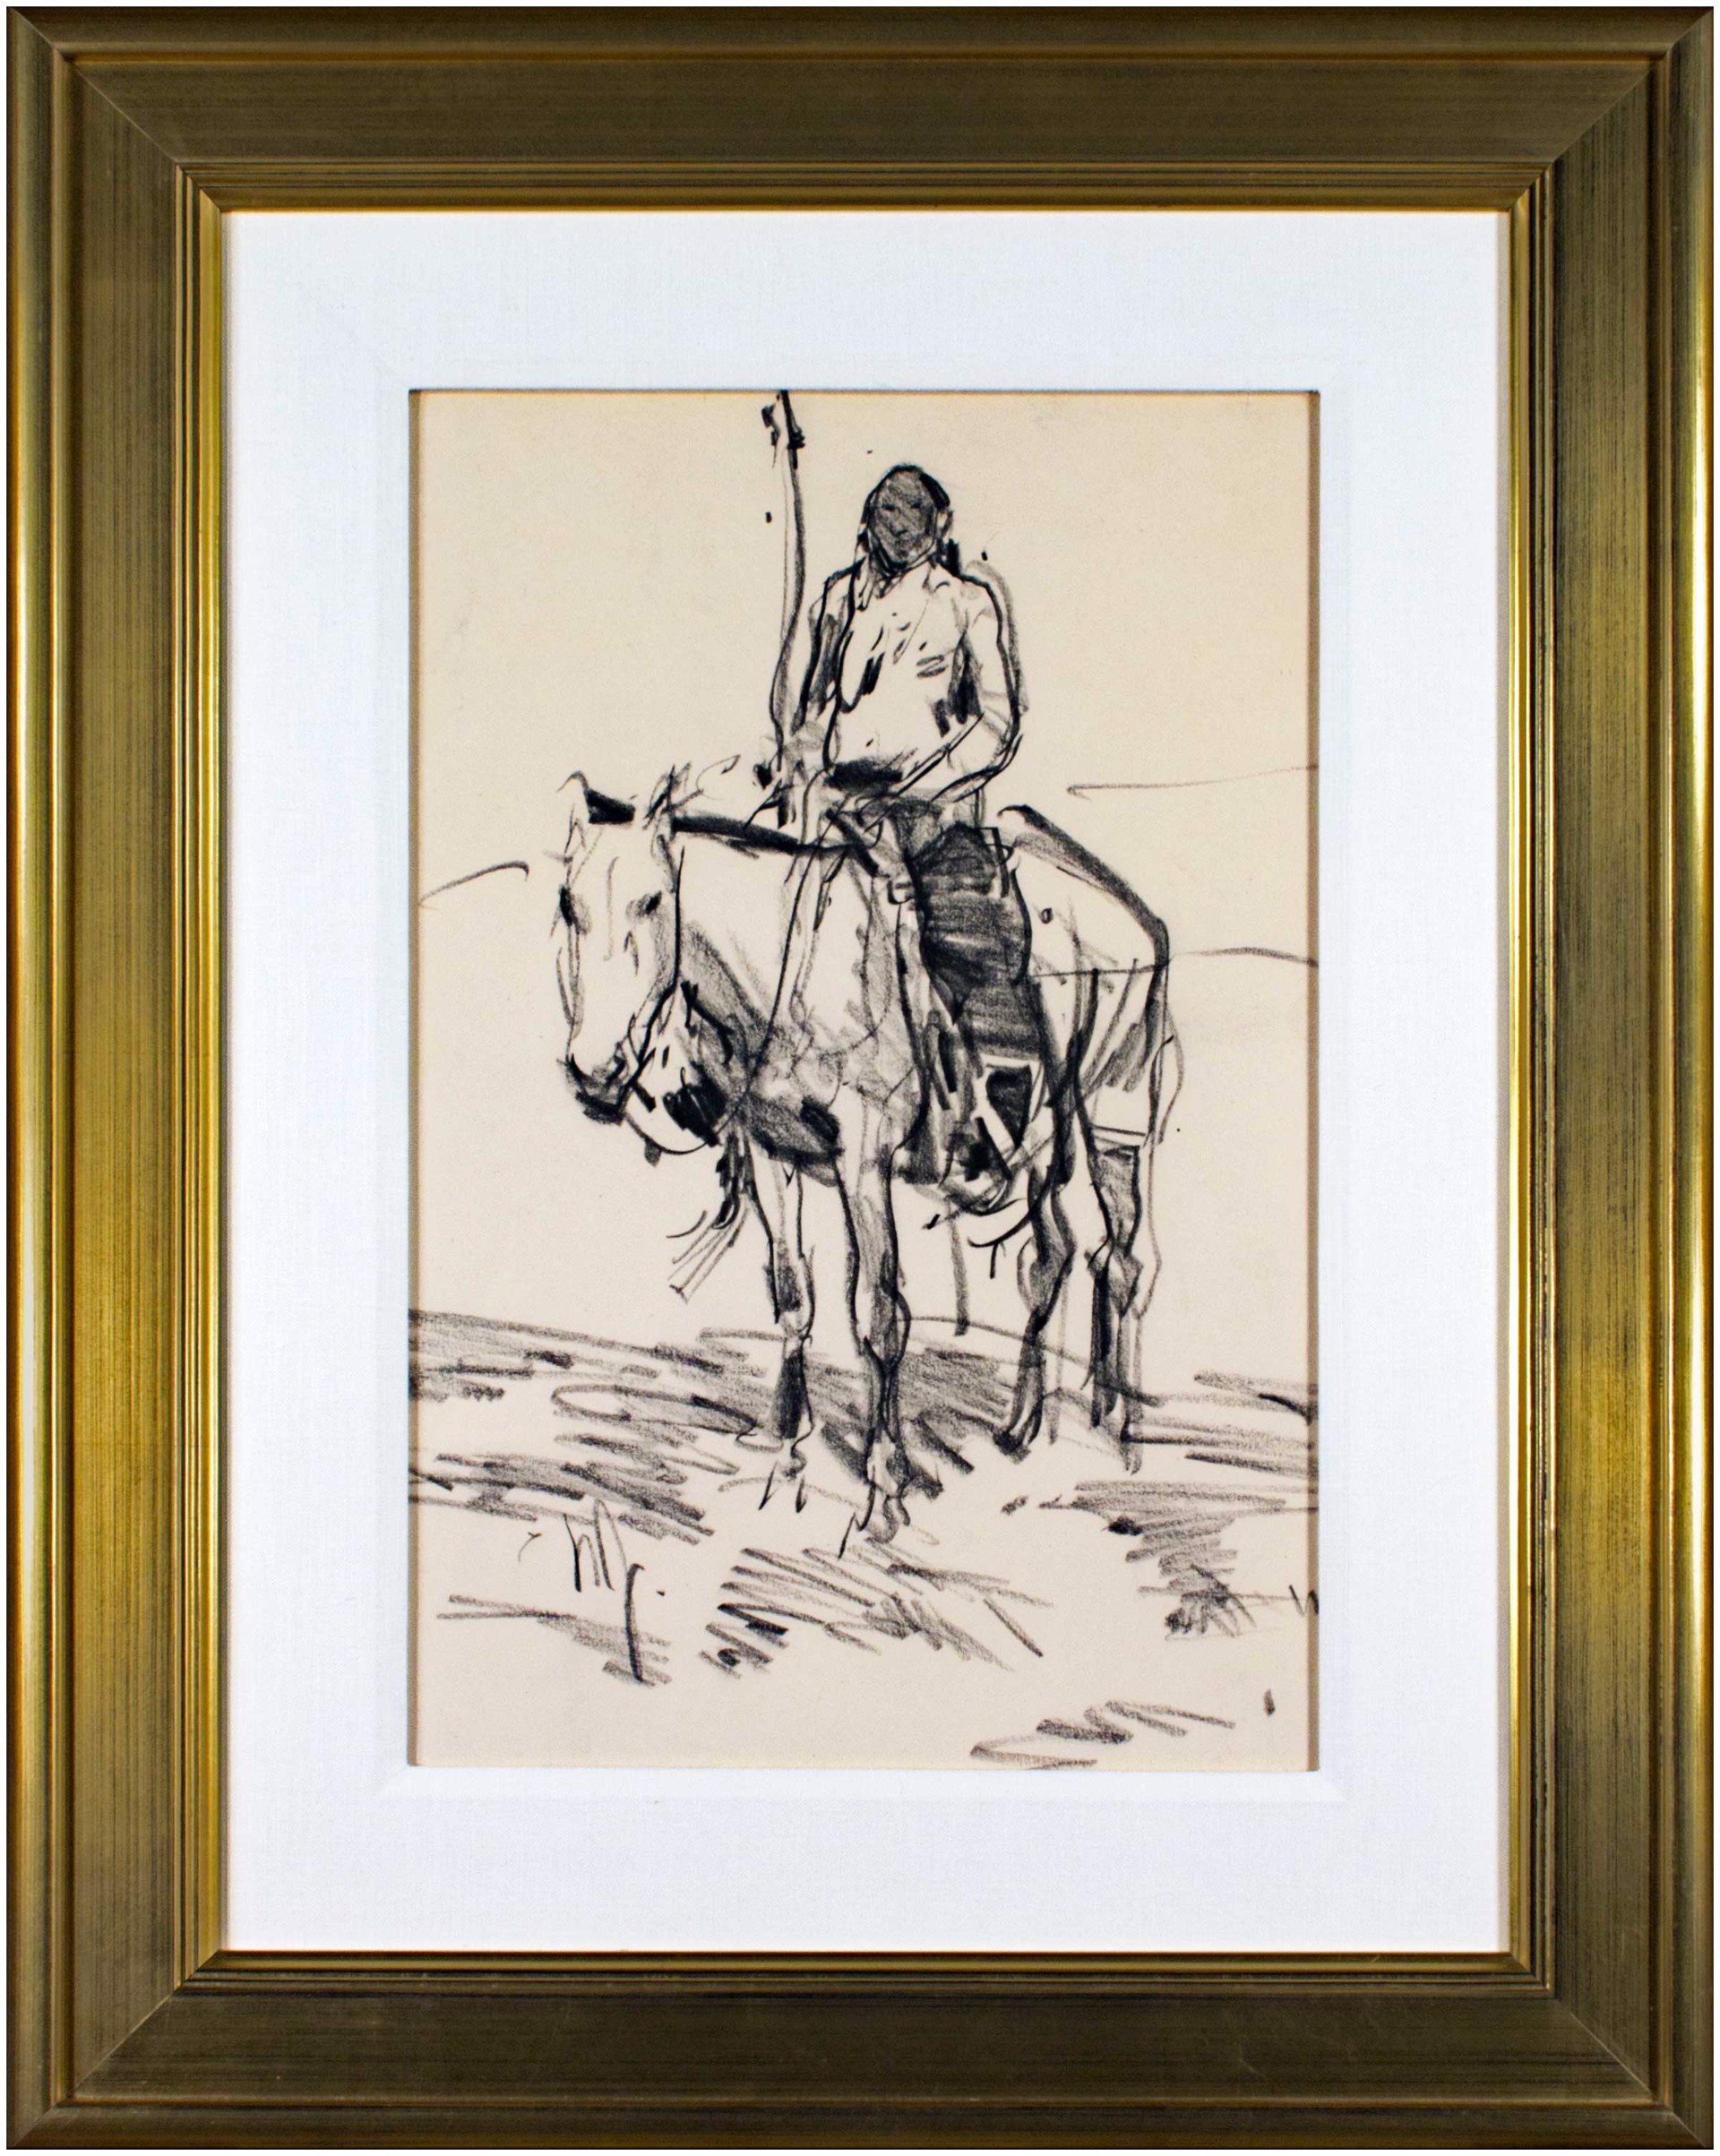 Indian On Horse by Ned Jacob (American b.1938)